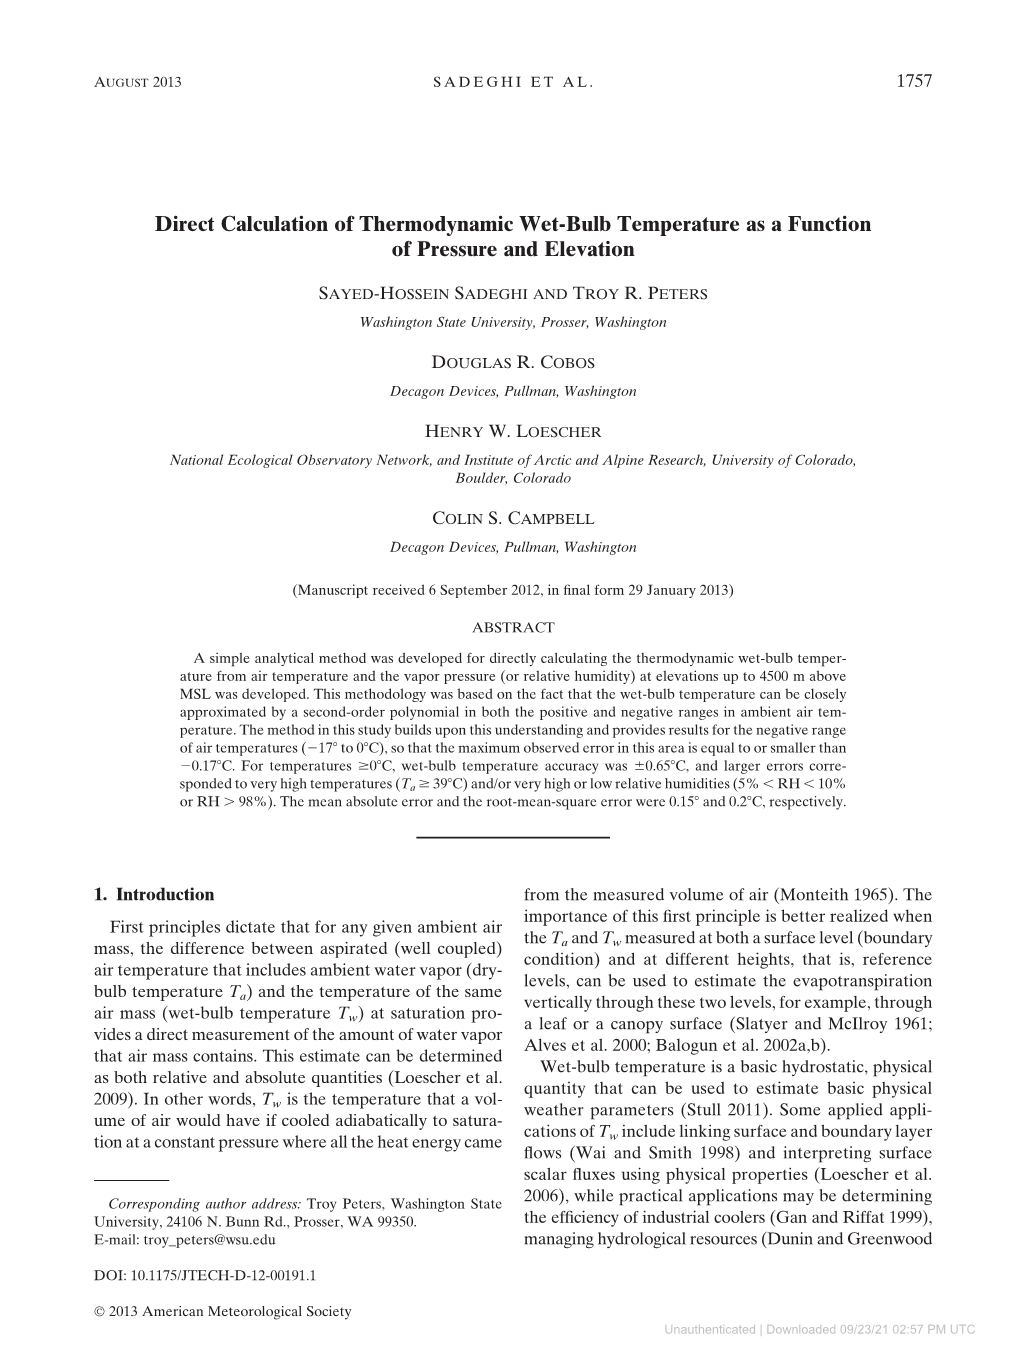 Direct Calculation of Thermodynamic Wet-Bulb Temperature As a Function of Pressure and Elevation